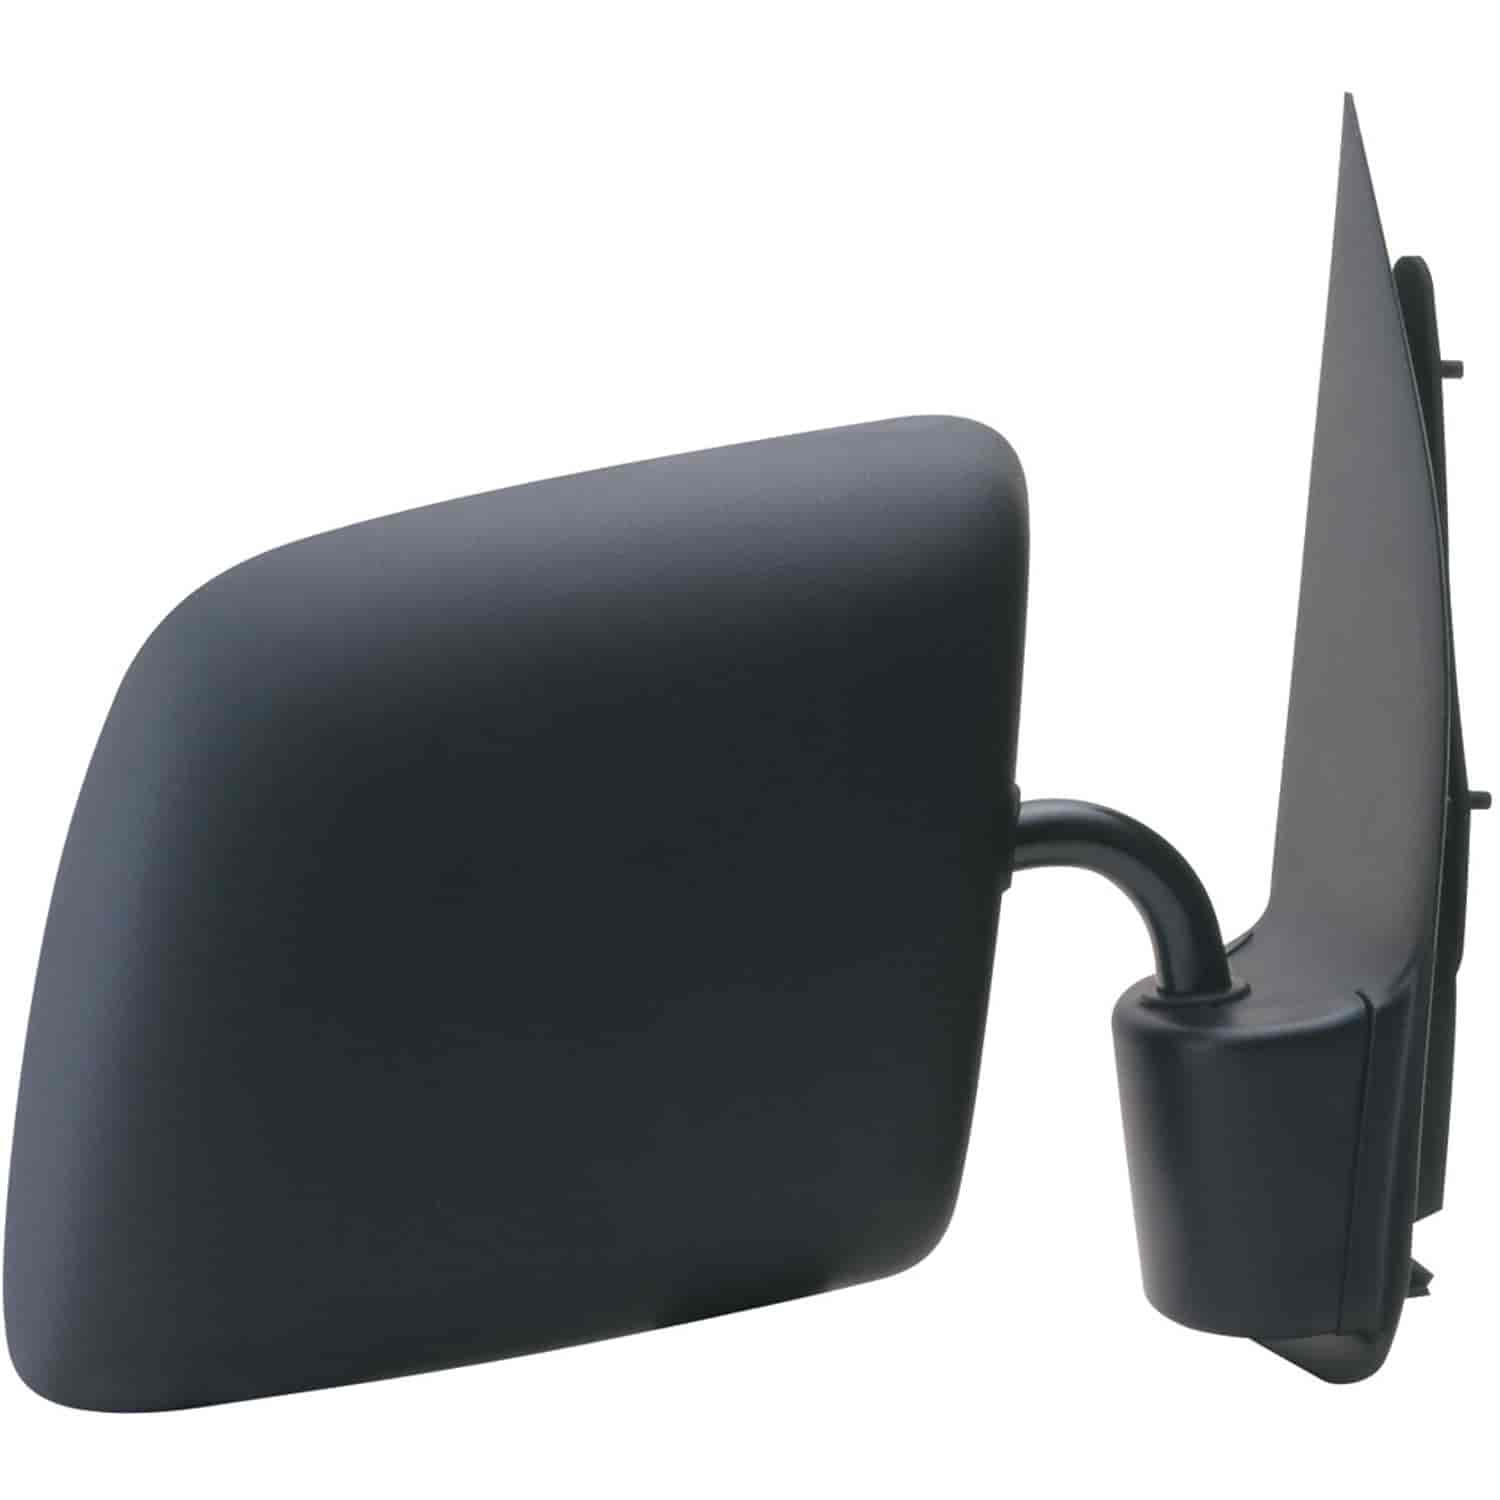 OEM Style Replacement mirror for 92-06 Ford Econoline